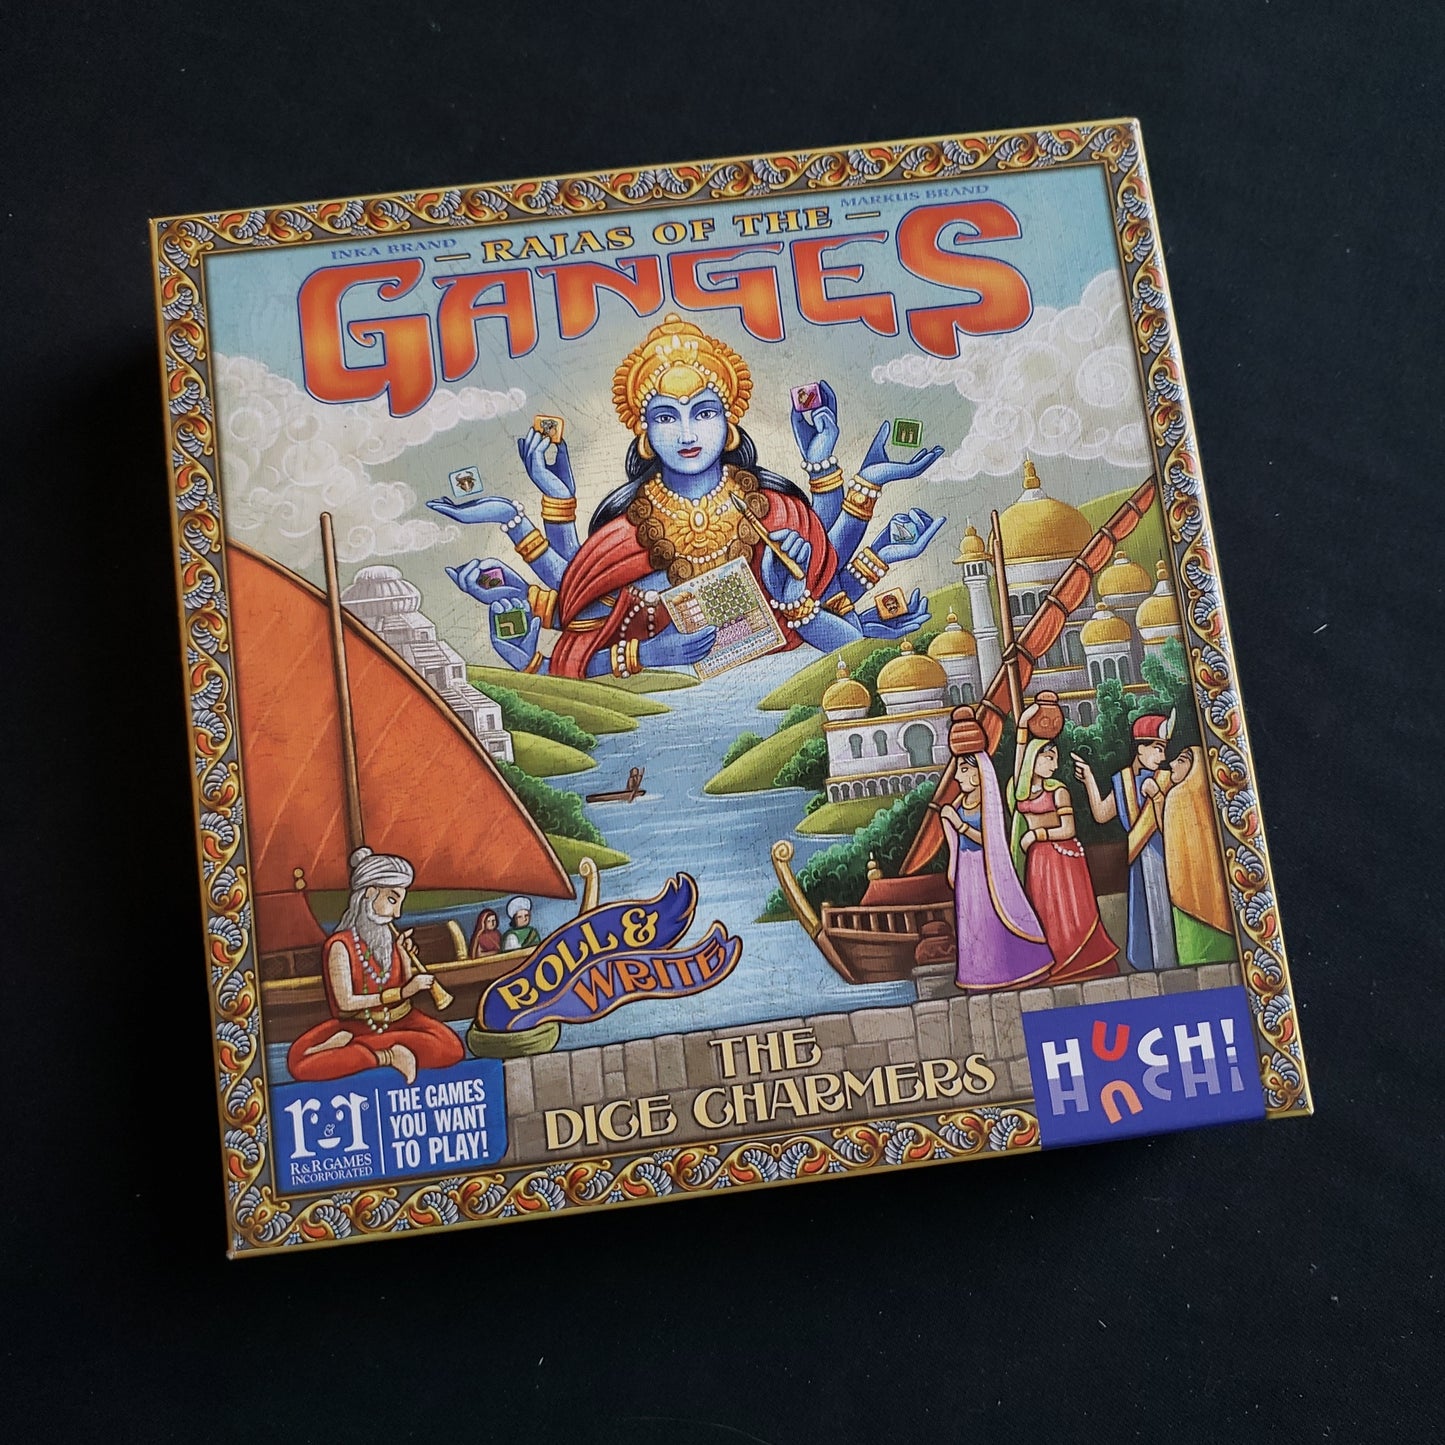 Image shows the front cover of the box of the Rajas of the Ganges: The Dice Charmers board game